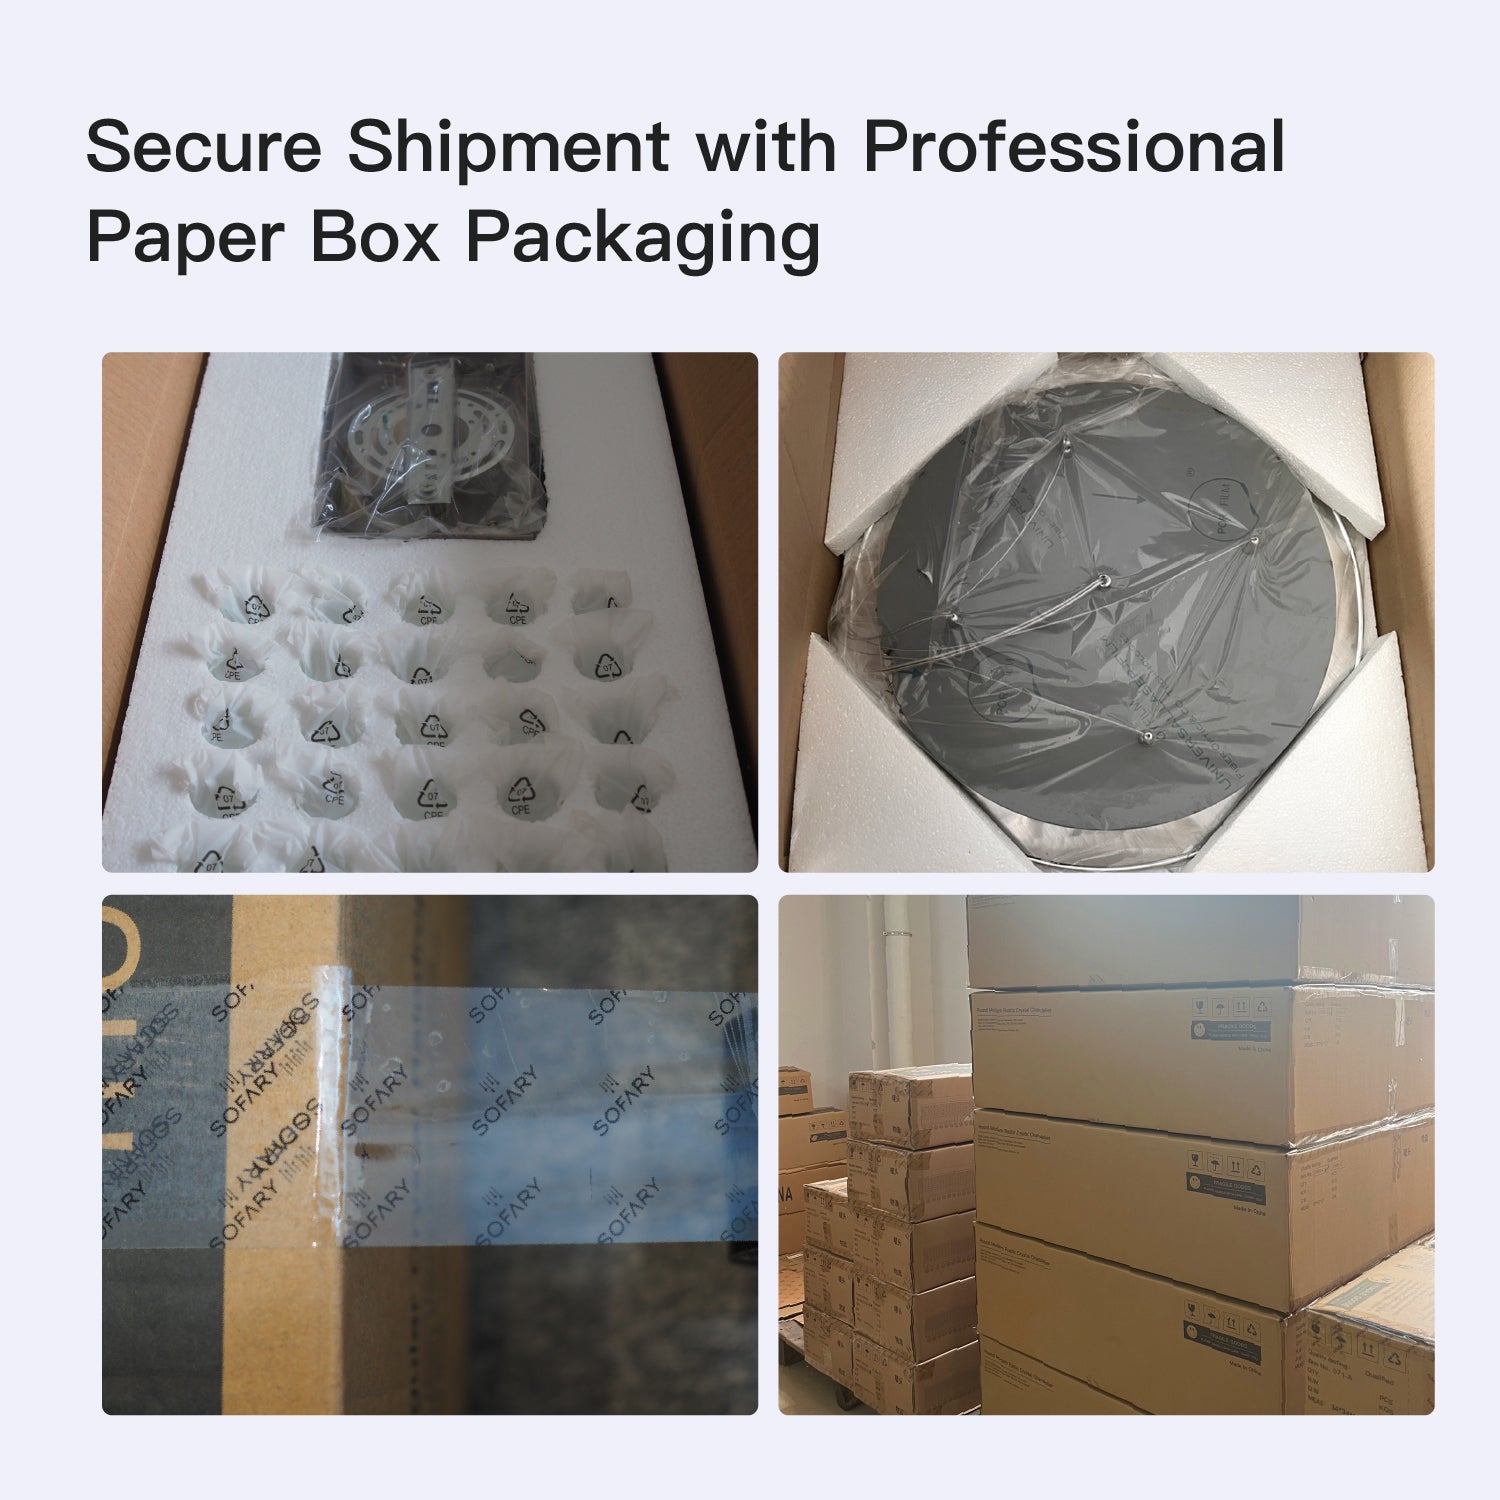 Secure Shipment with ProfessionaI Paper BOX Packaging